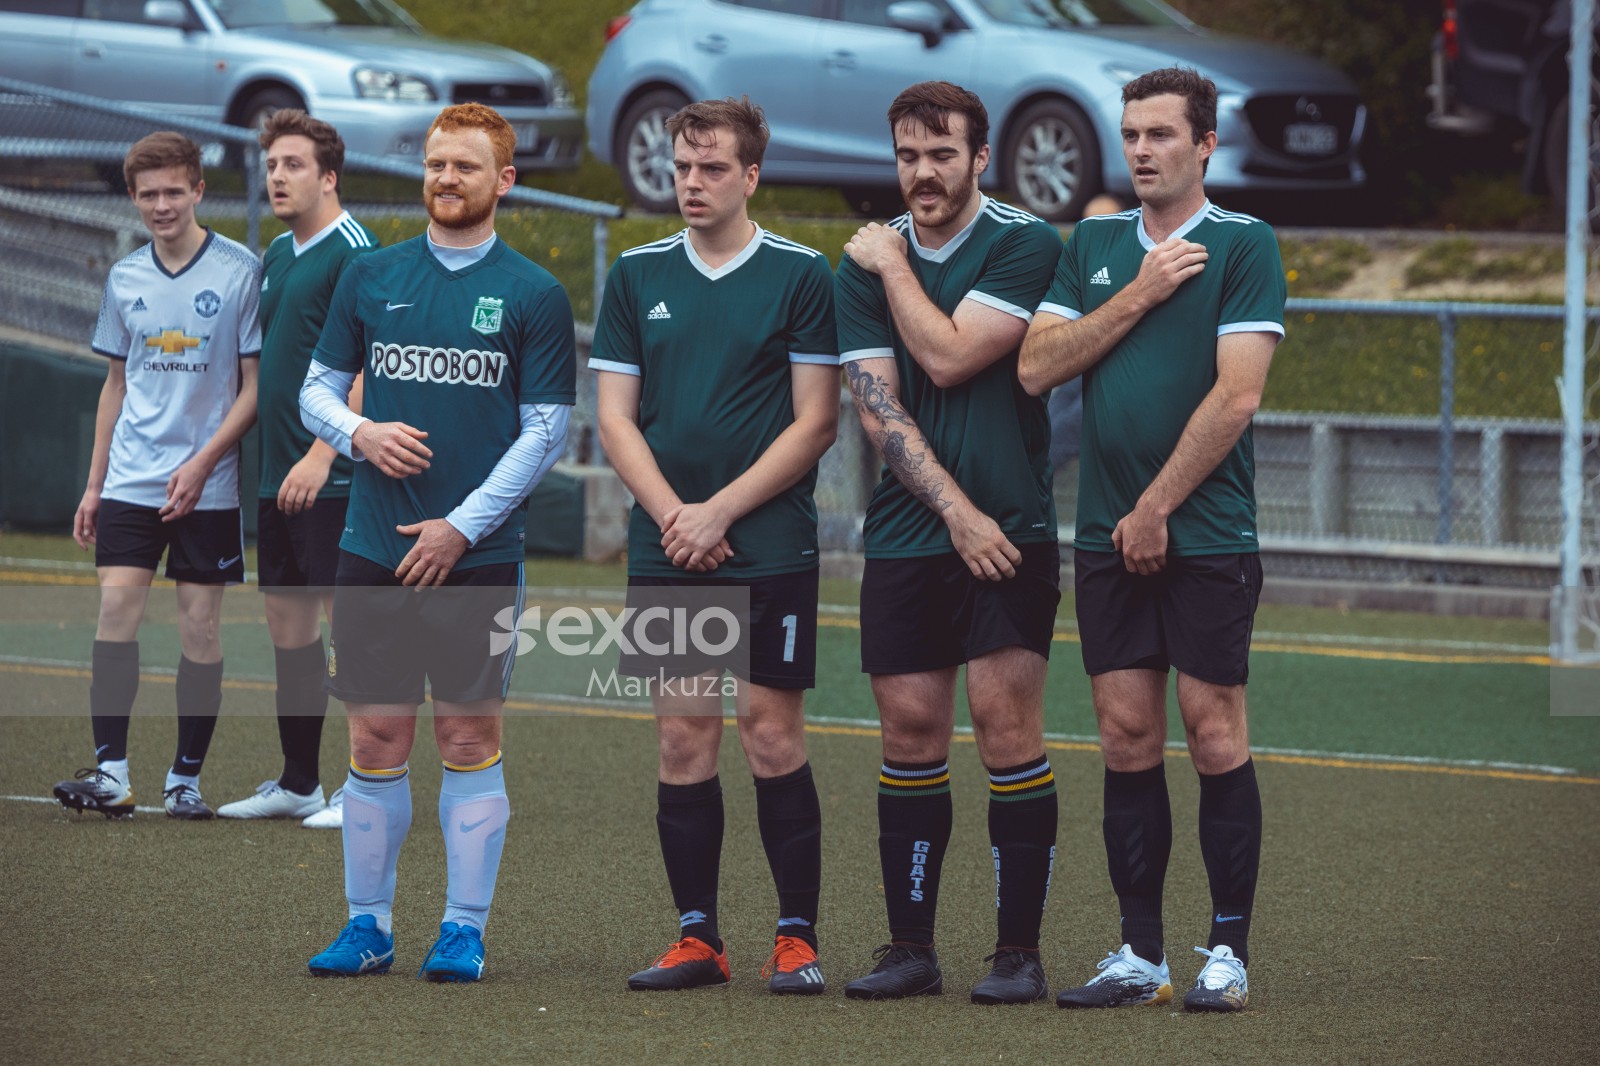 Players in green Adidas shirts form a defence line - Sports Zone sunday league